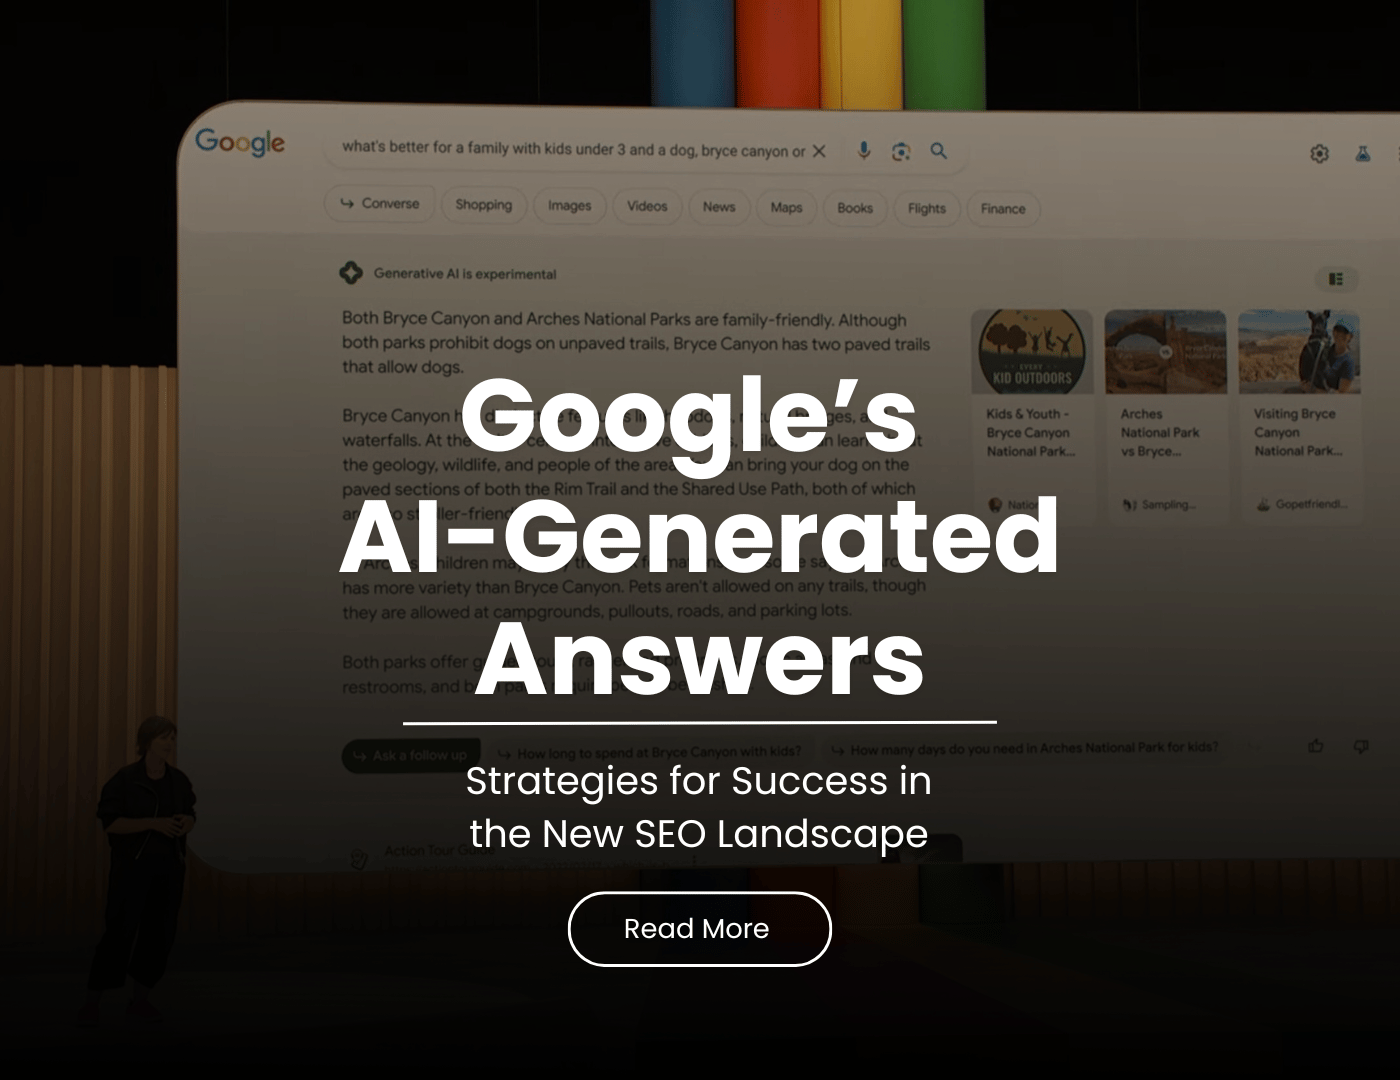 Google’s AI-Generated Answers: Strategies for Success in the New SEO Landscape